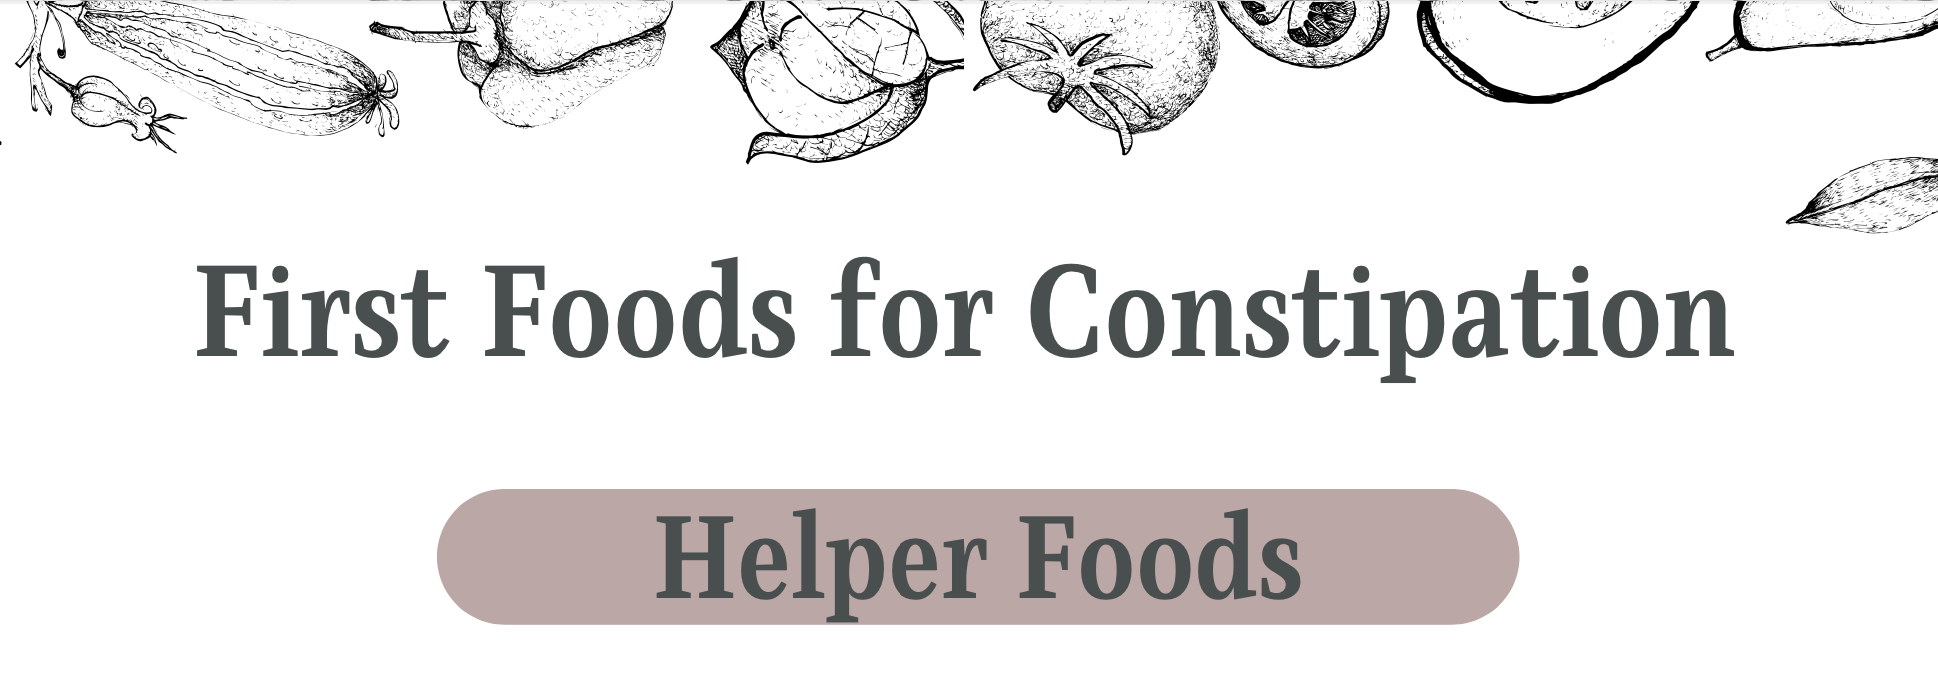 foods for constipation in babies